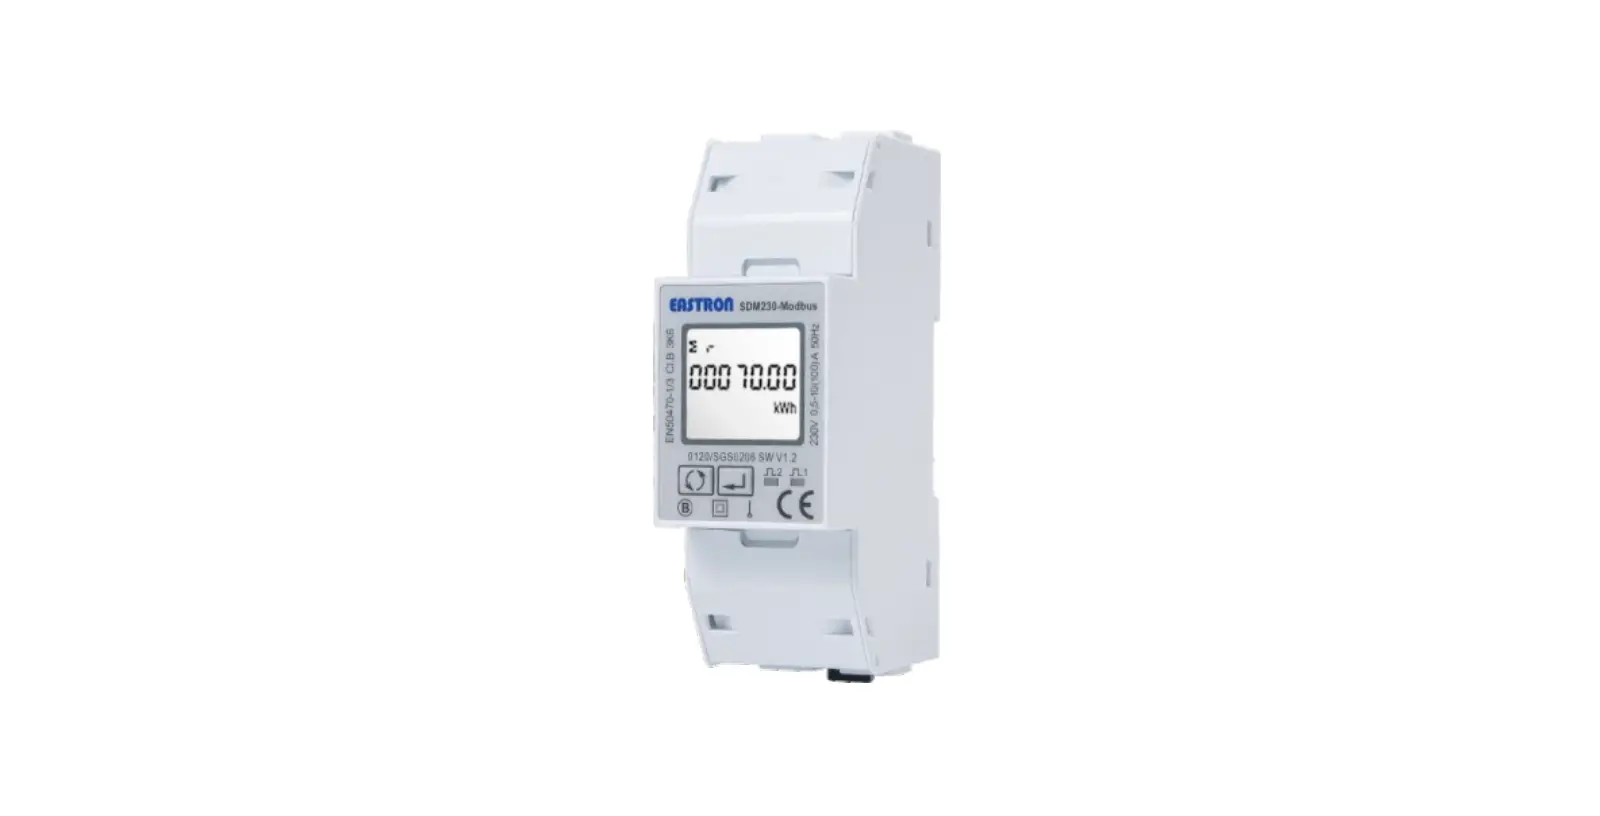 Optonica LED SDM230 Series Single Phase Two Wires Multifunction Din Rail Meter